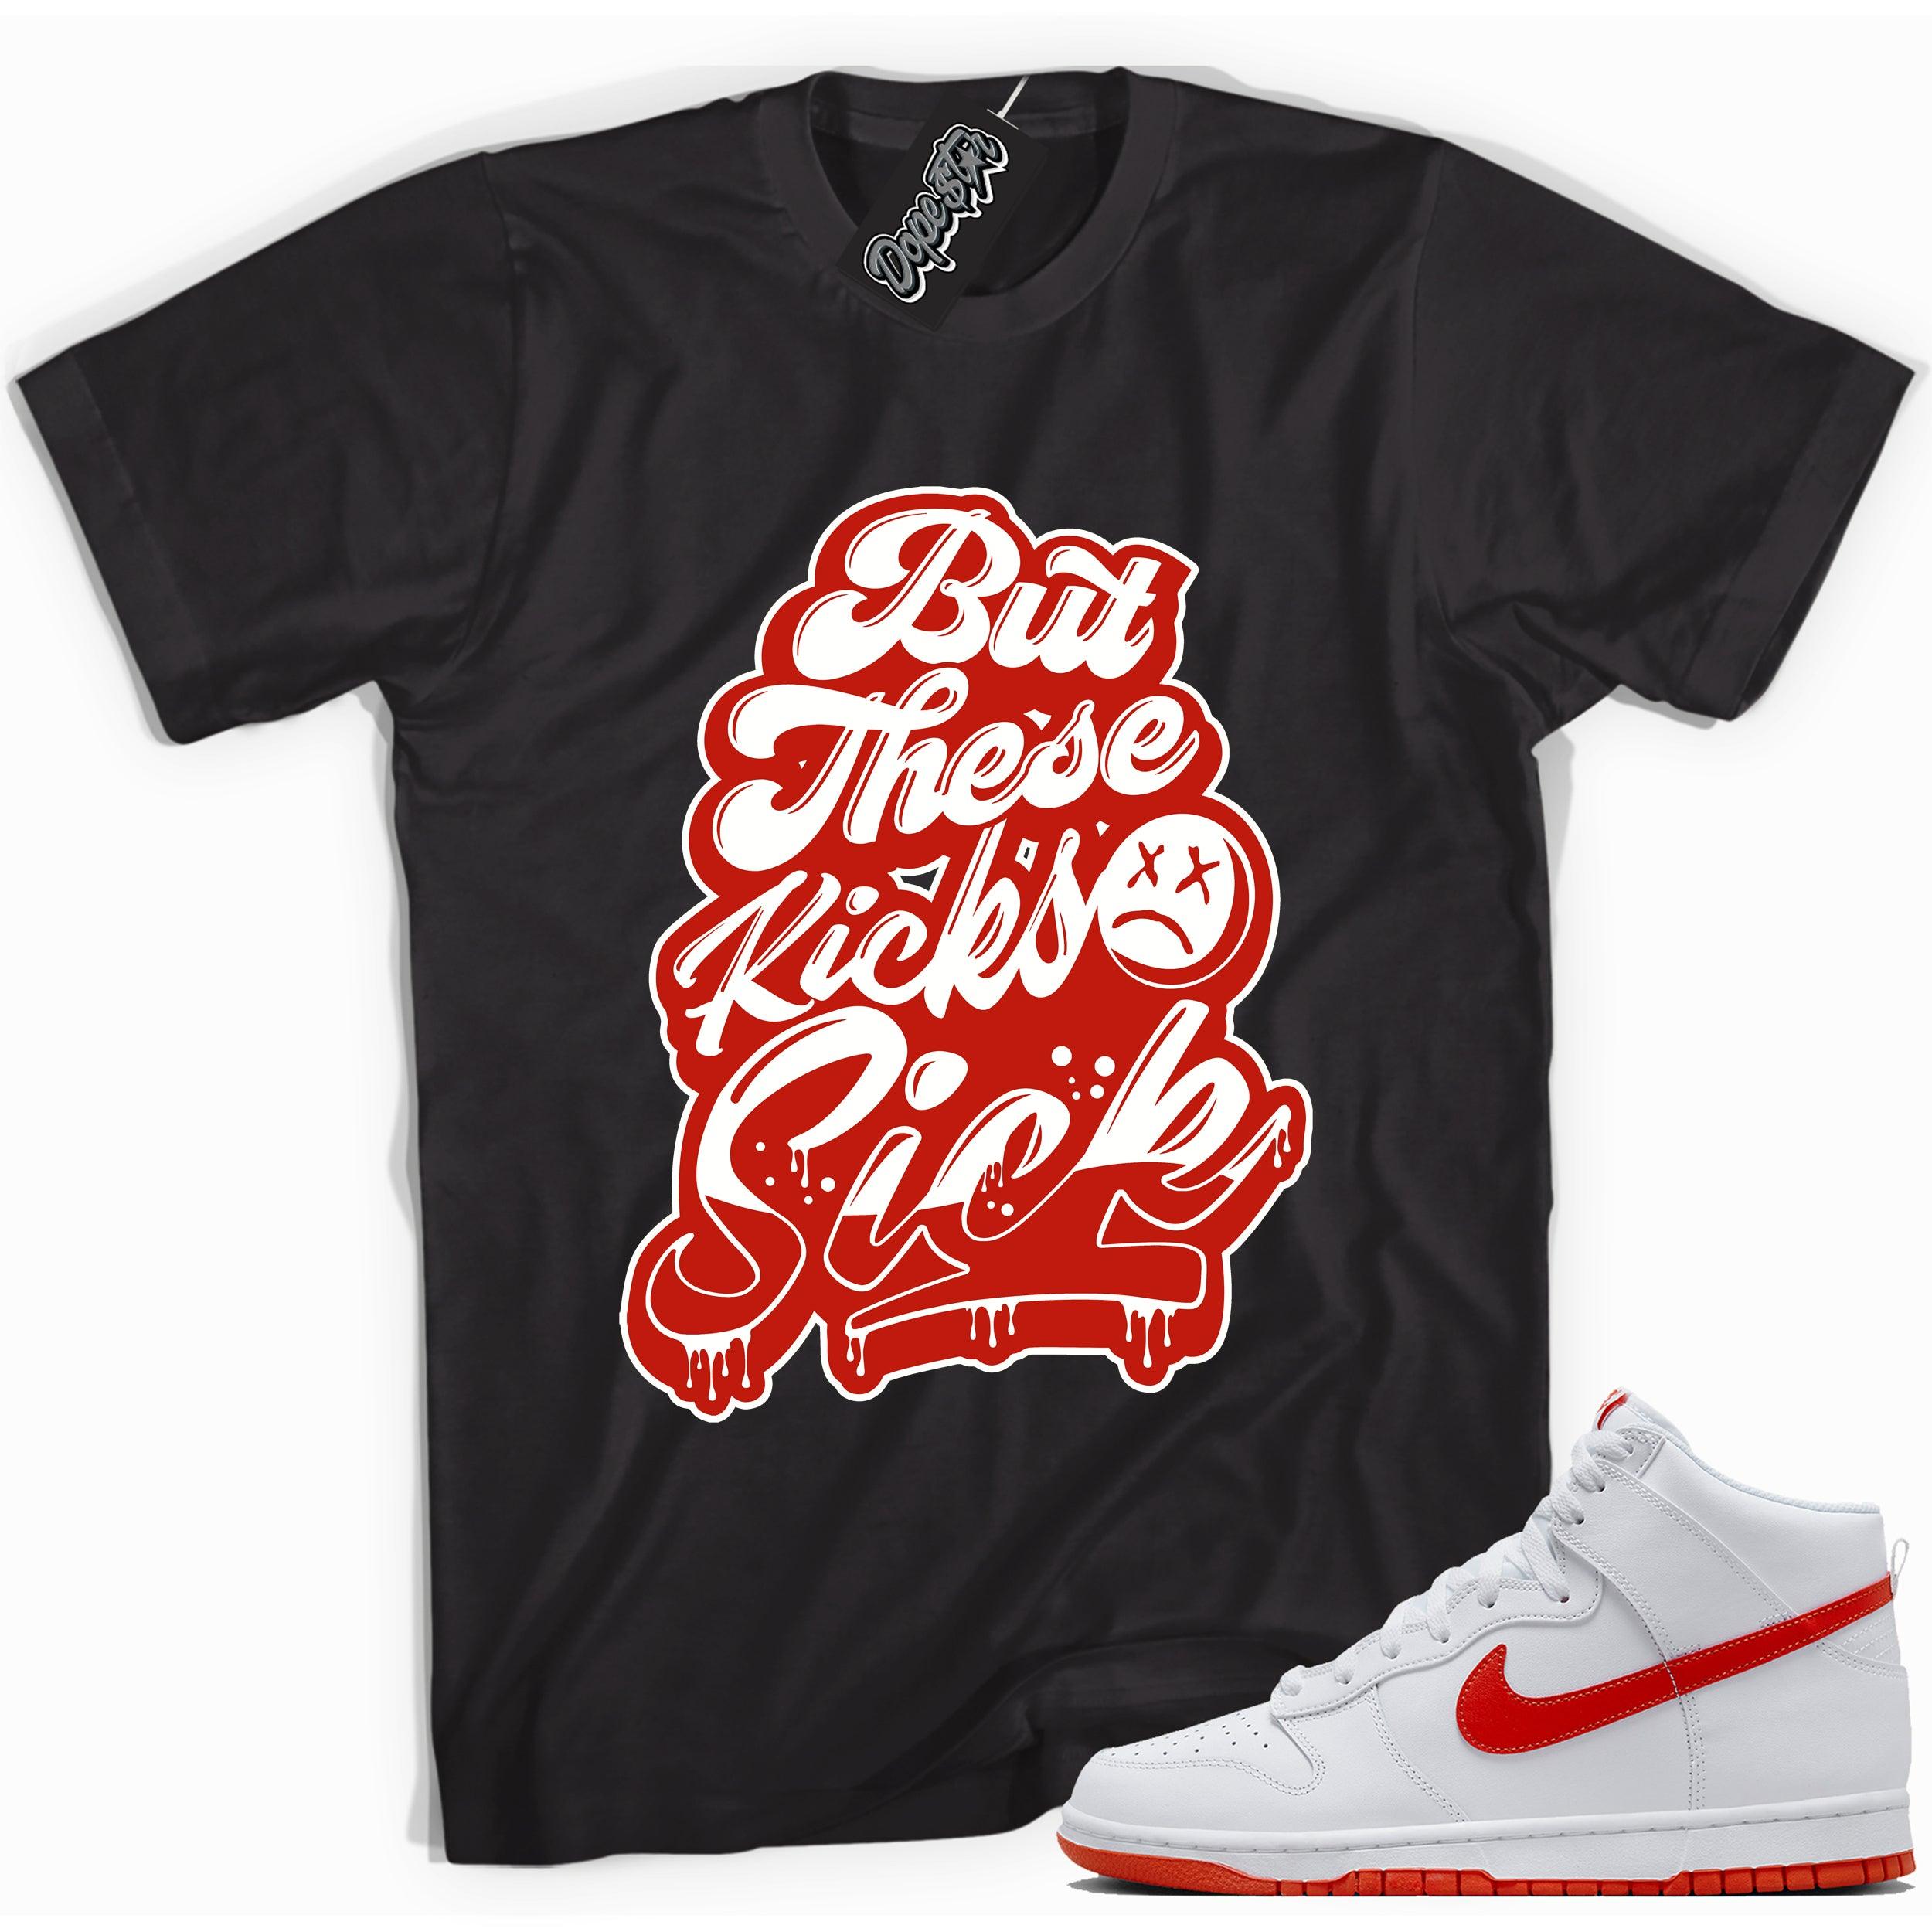 Cool black graphic tee with 'sick kicks' print, that perfectly matches Nike Dunk High White Picante Red sneakers.